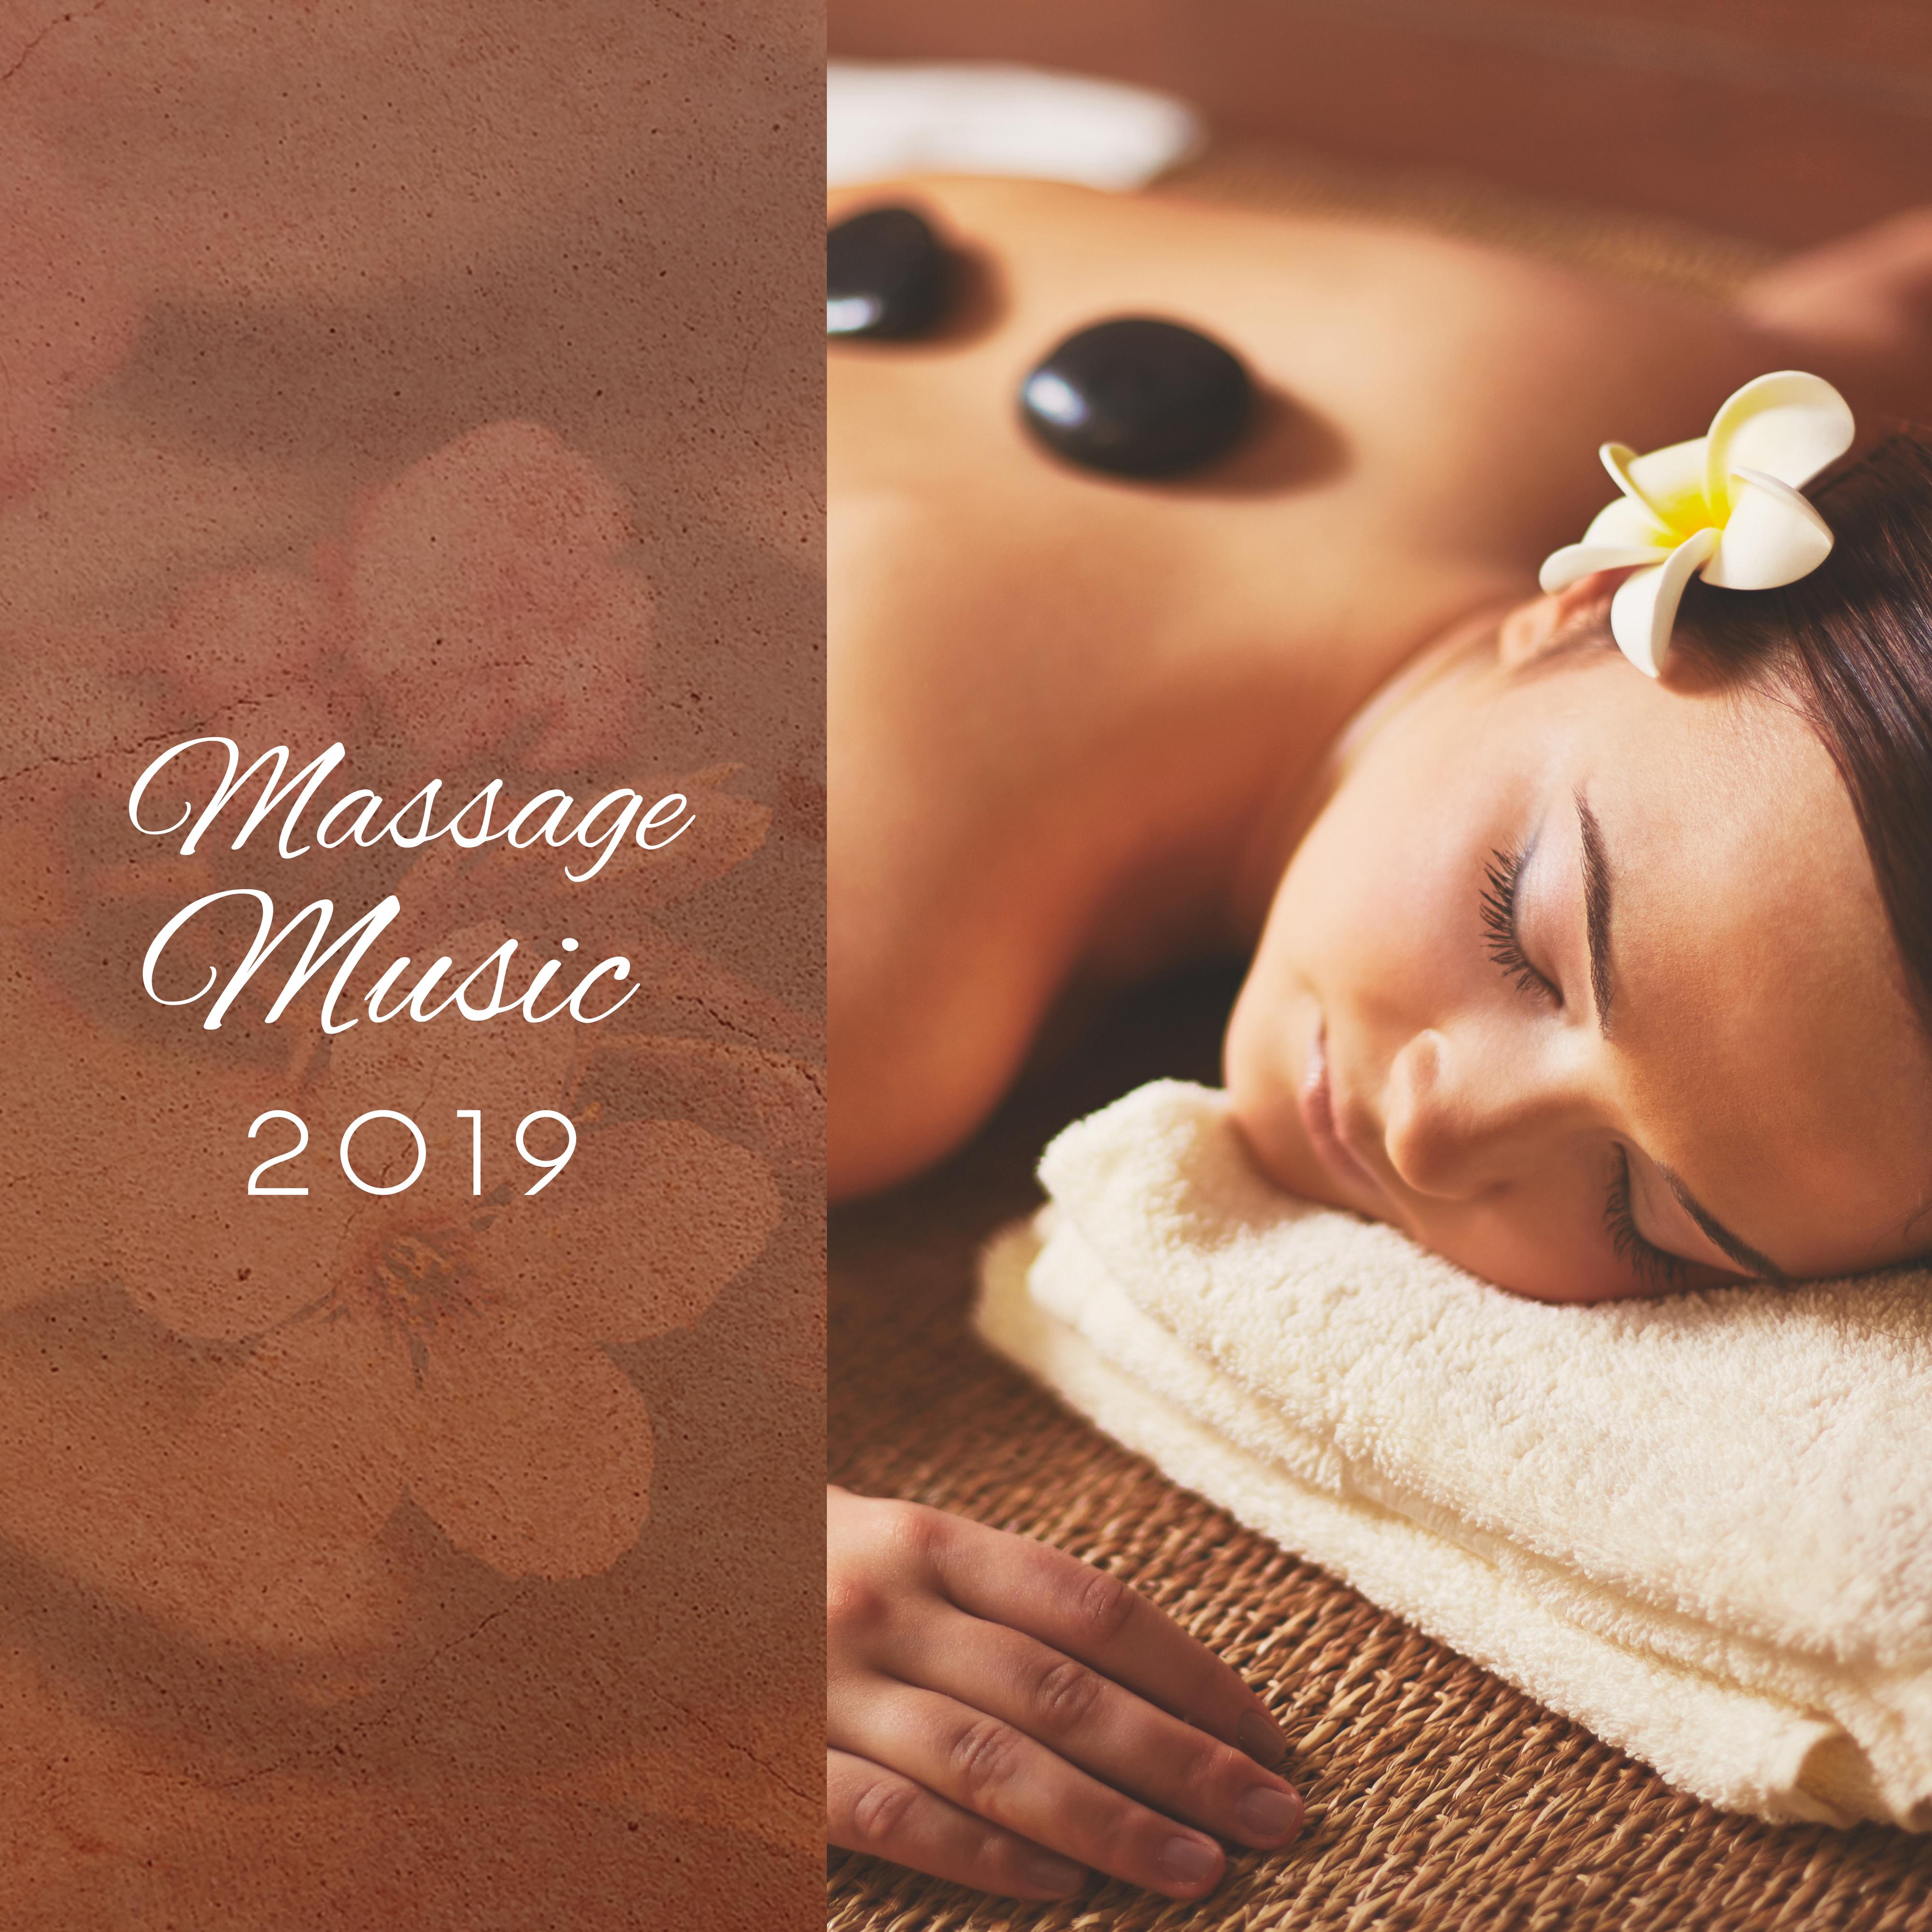 Massage Music 2019  Relaxing Songs for Pure Relaxation, Sleep, Spa Chillout Music, Zen Lounge, Healing Melodies to Rest, Spa Therapy